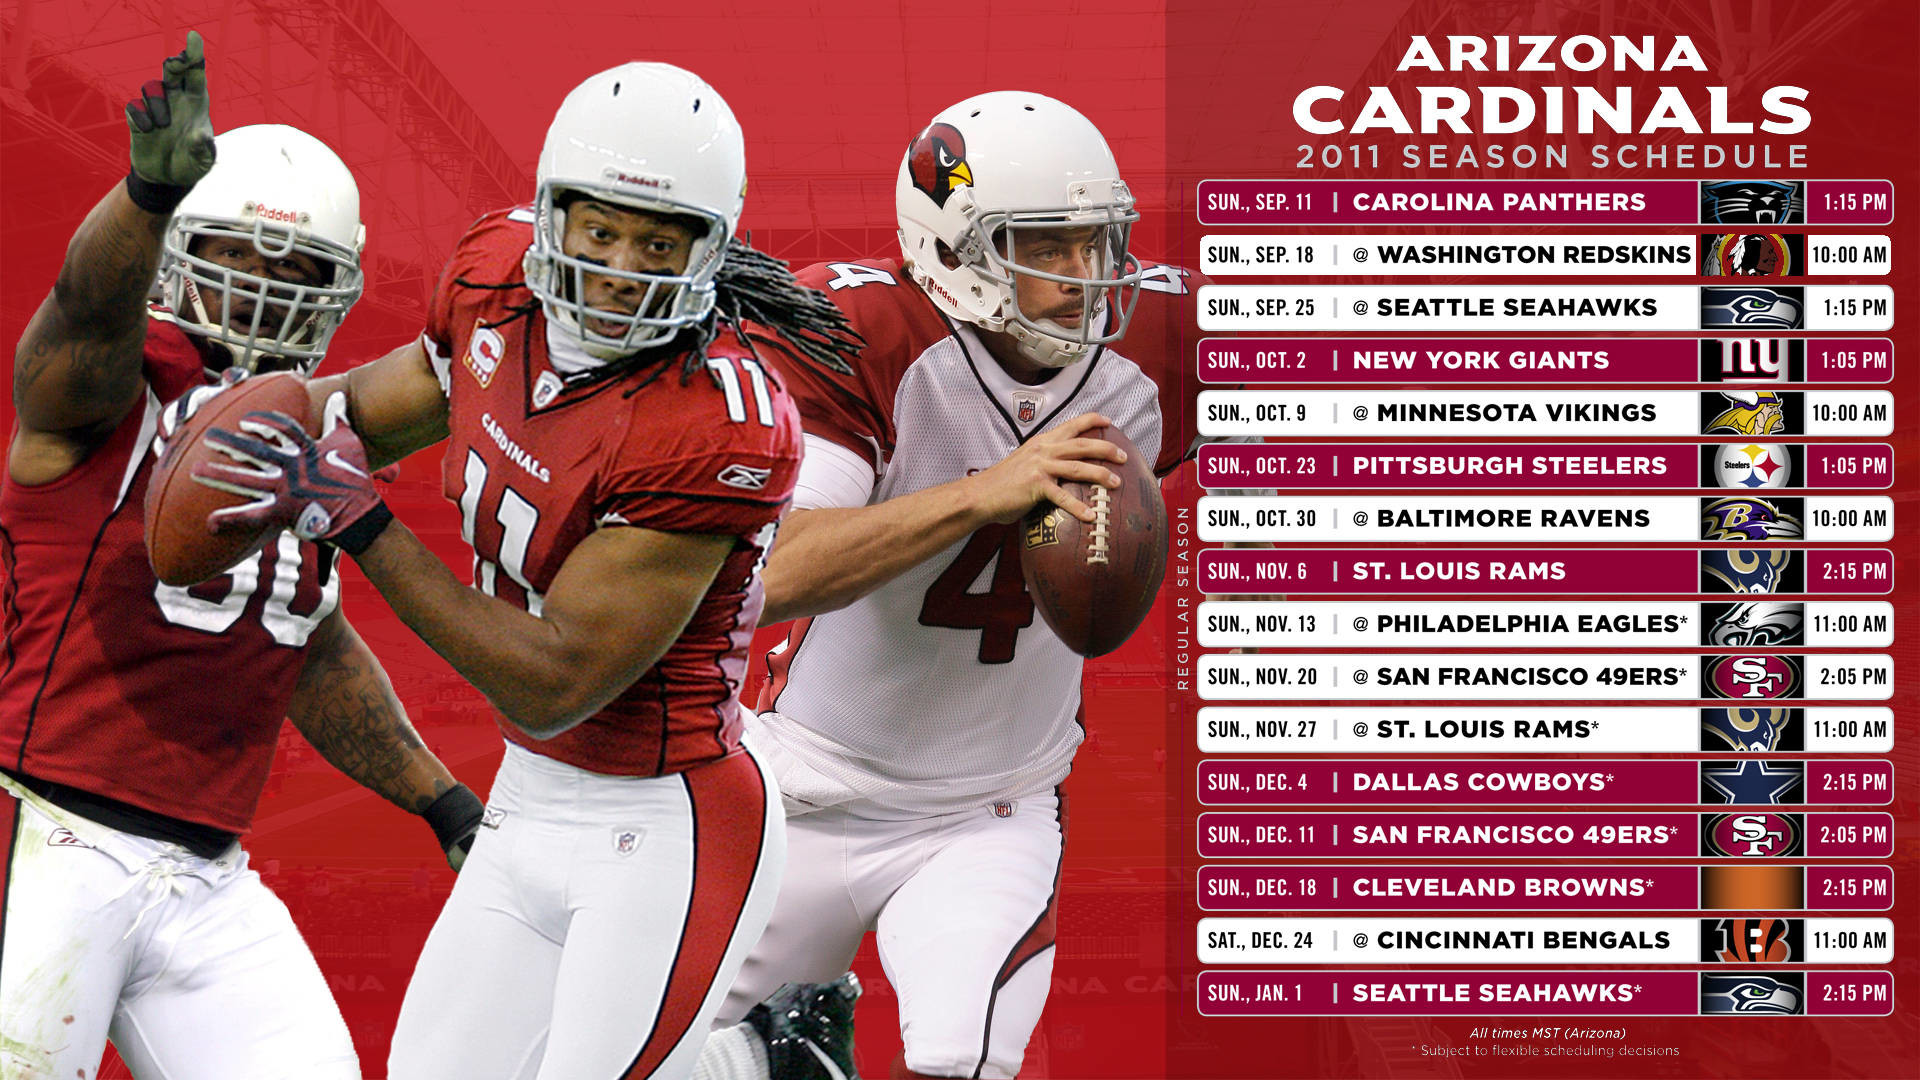 Cardinals panthers betting line list of forex brokers regulated by fsa federal student